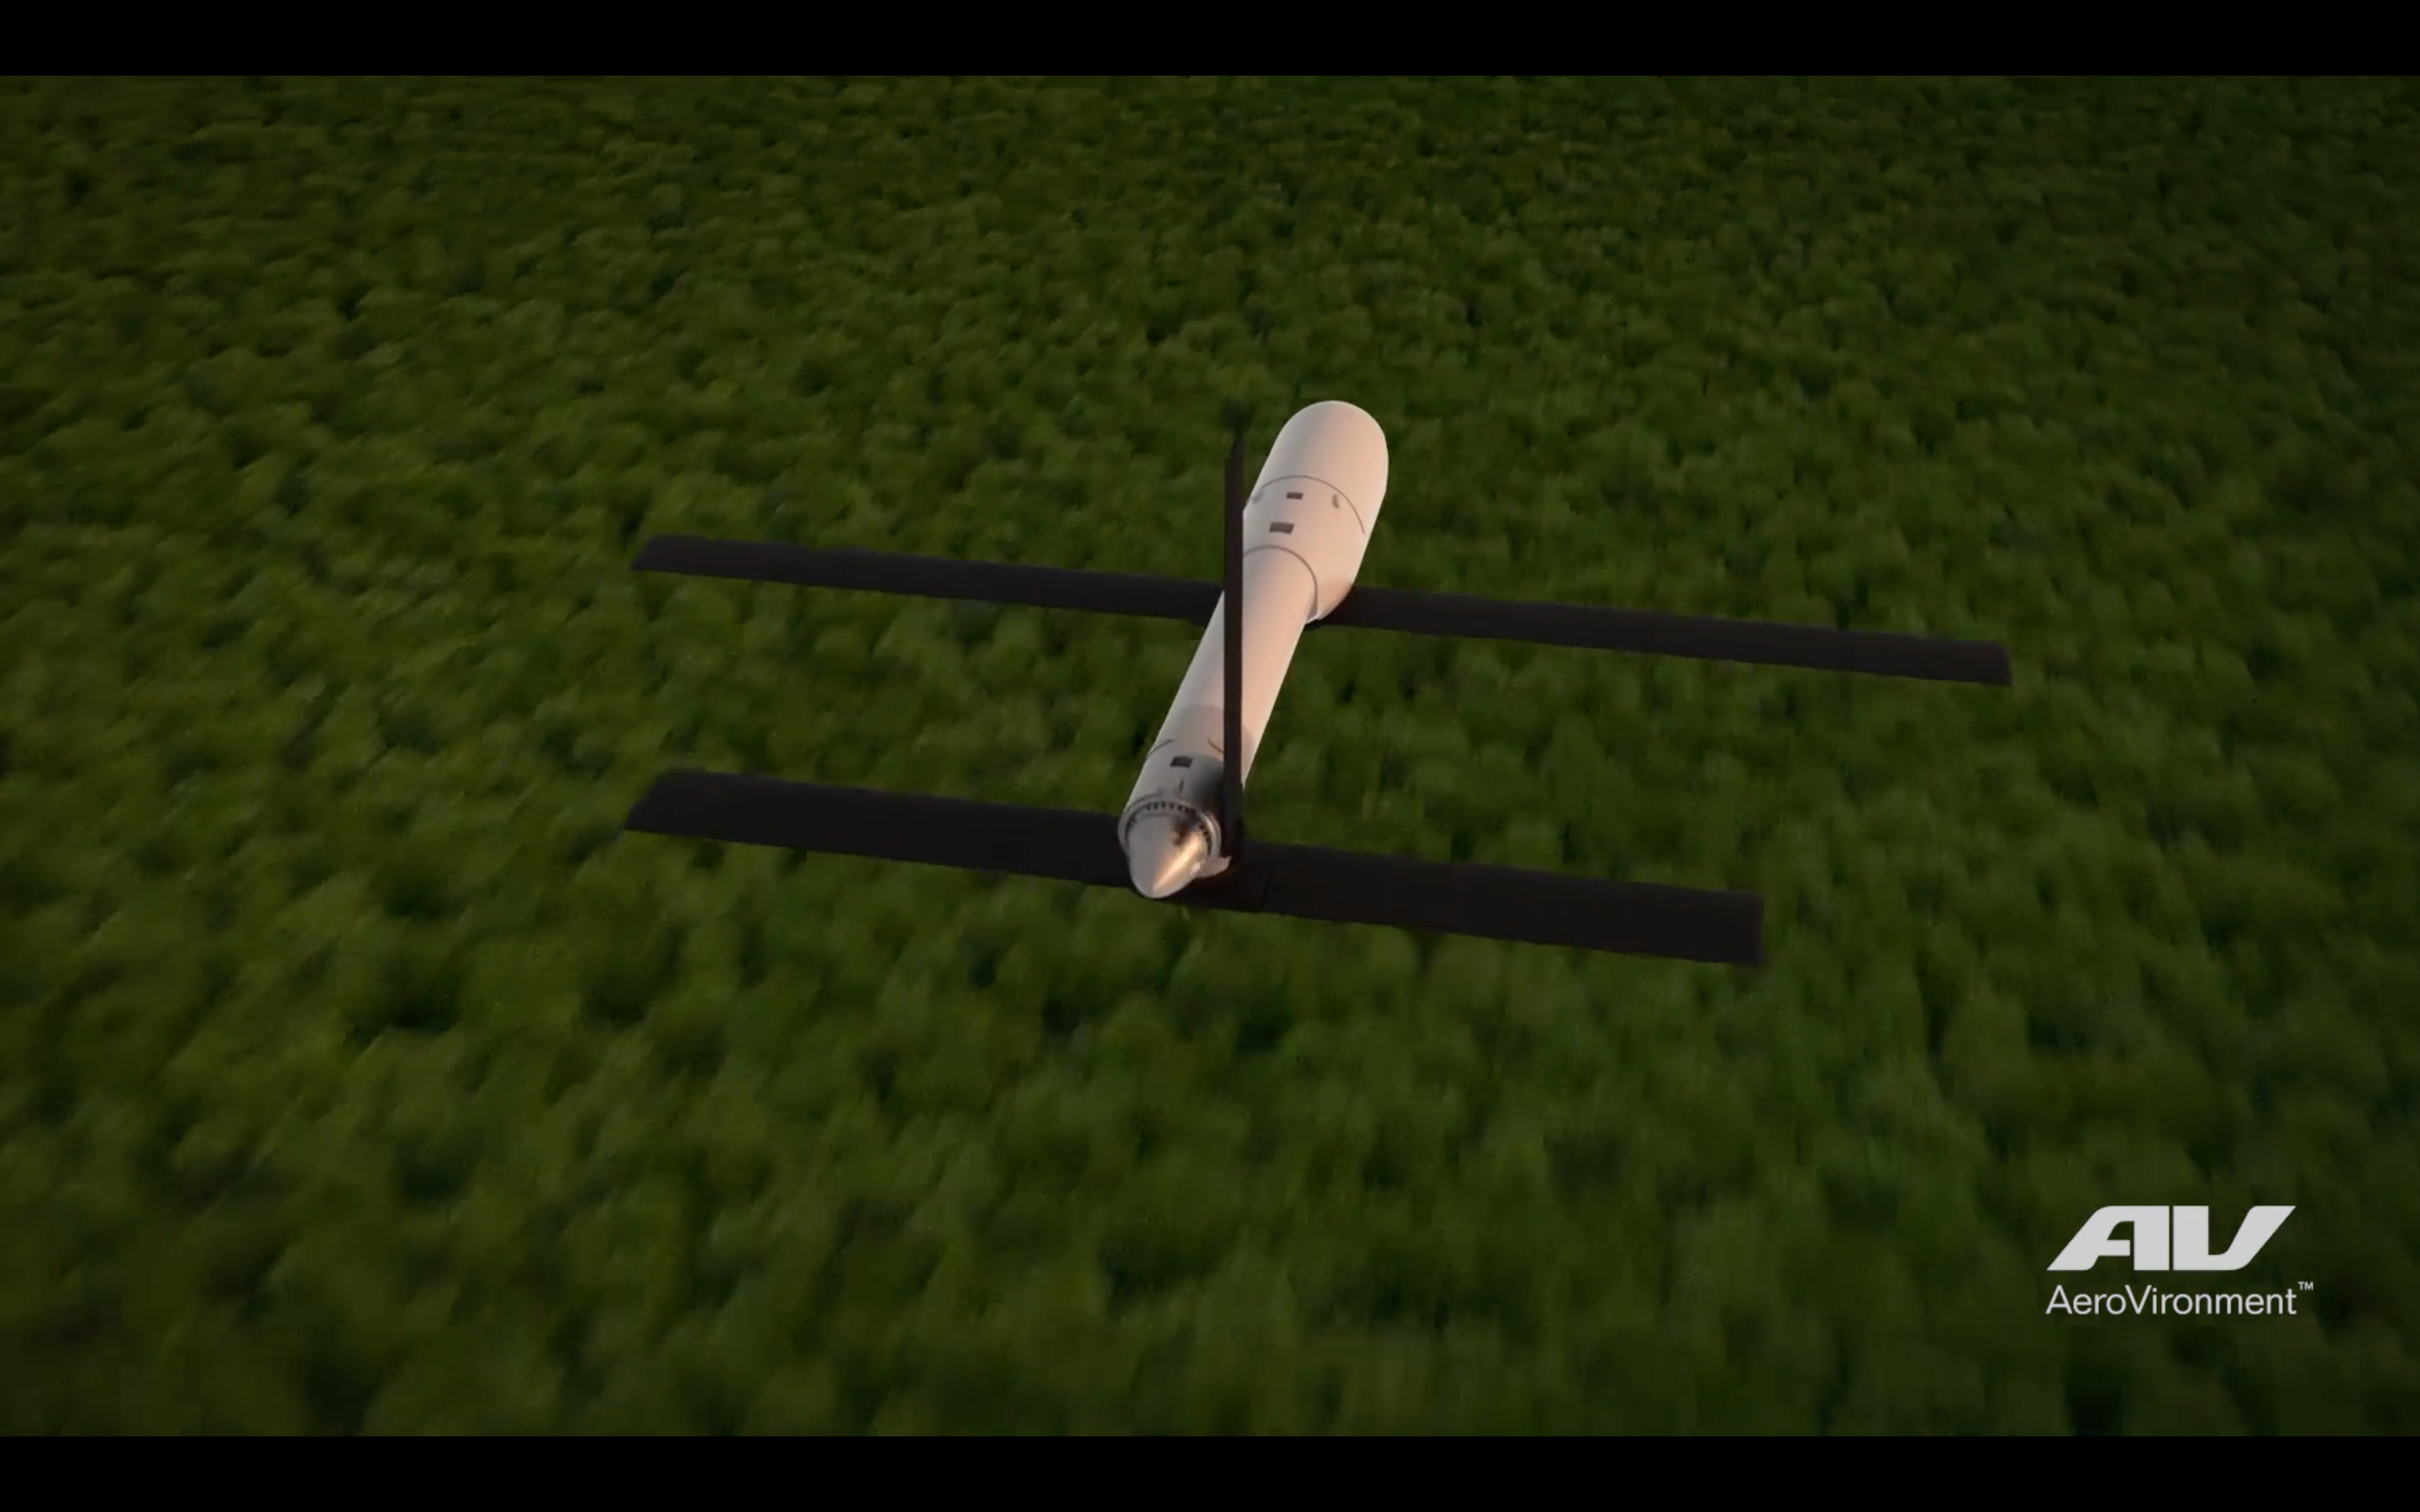 An animation of the Switchblade 600 in flight. Aerovironment